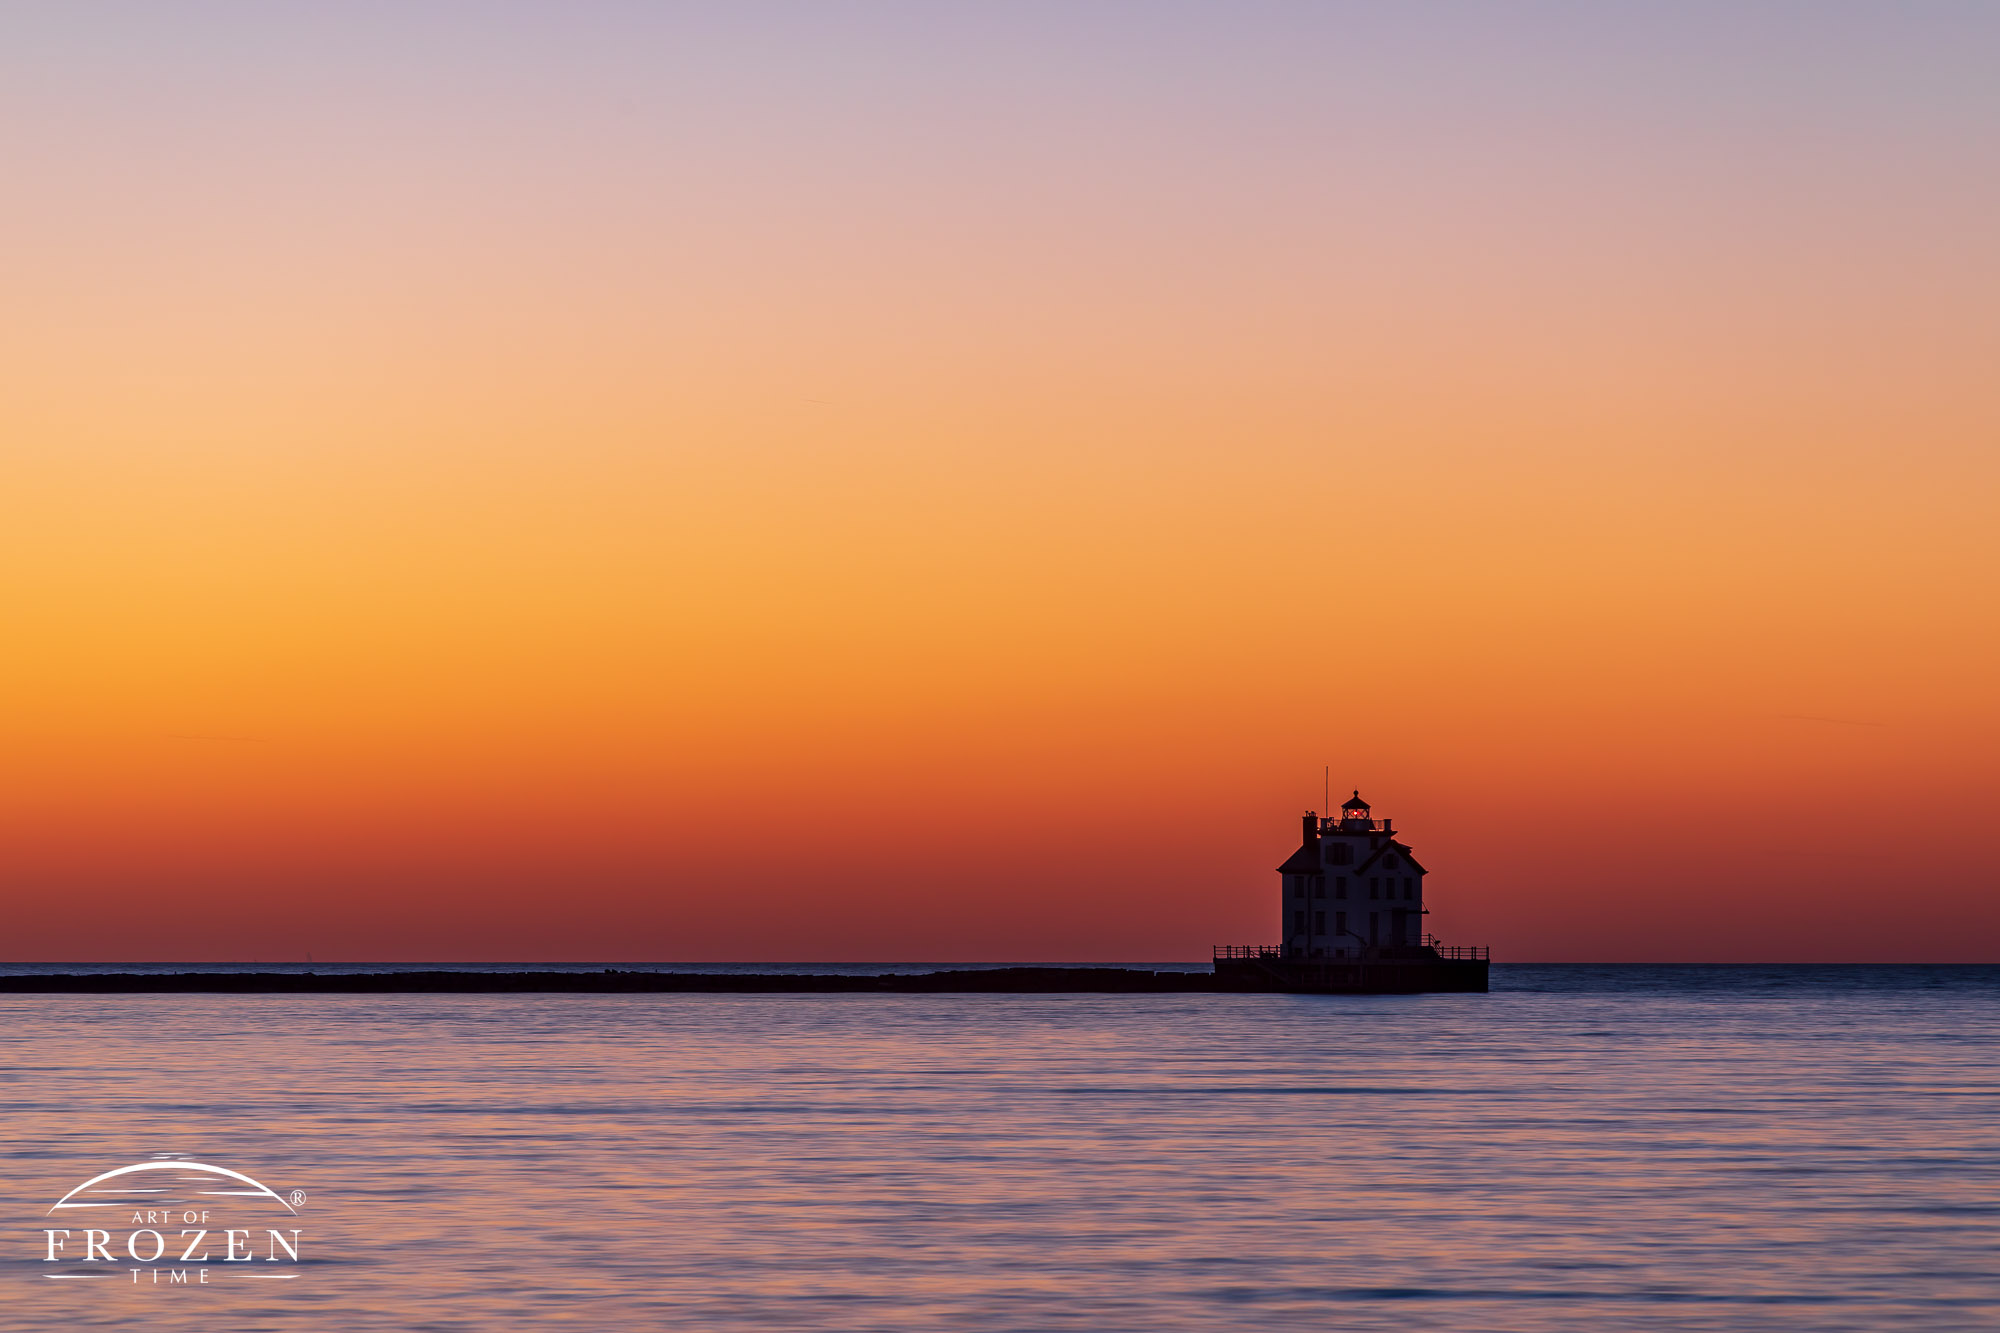 Twilight over Lorain Lighthouse as the clear Lake Erie horizon takes on varying orange hues while the lake surface refracts light from the darker blue skies above.